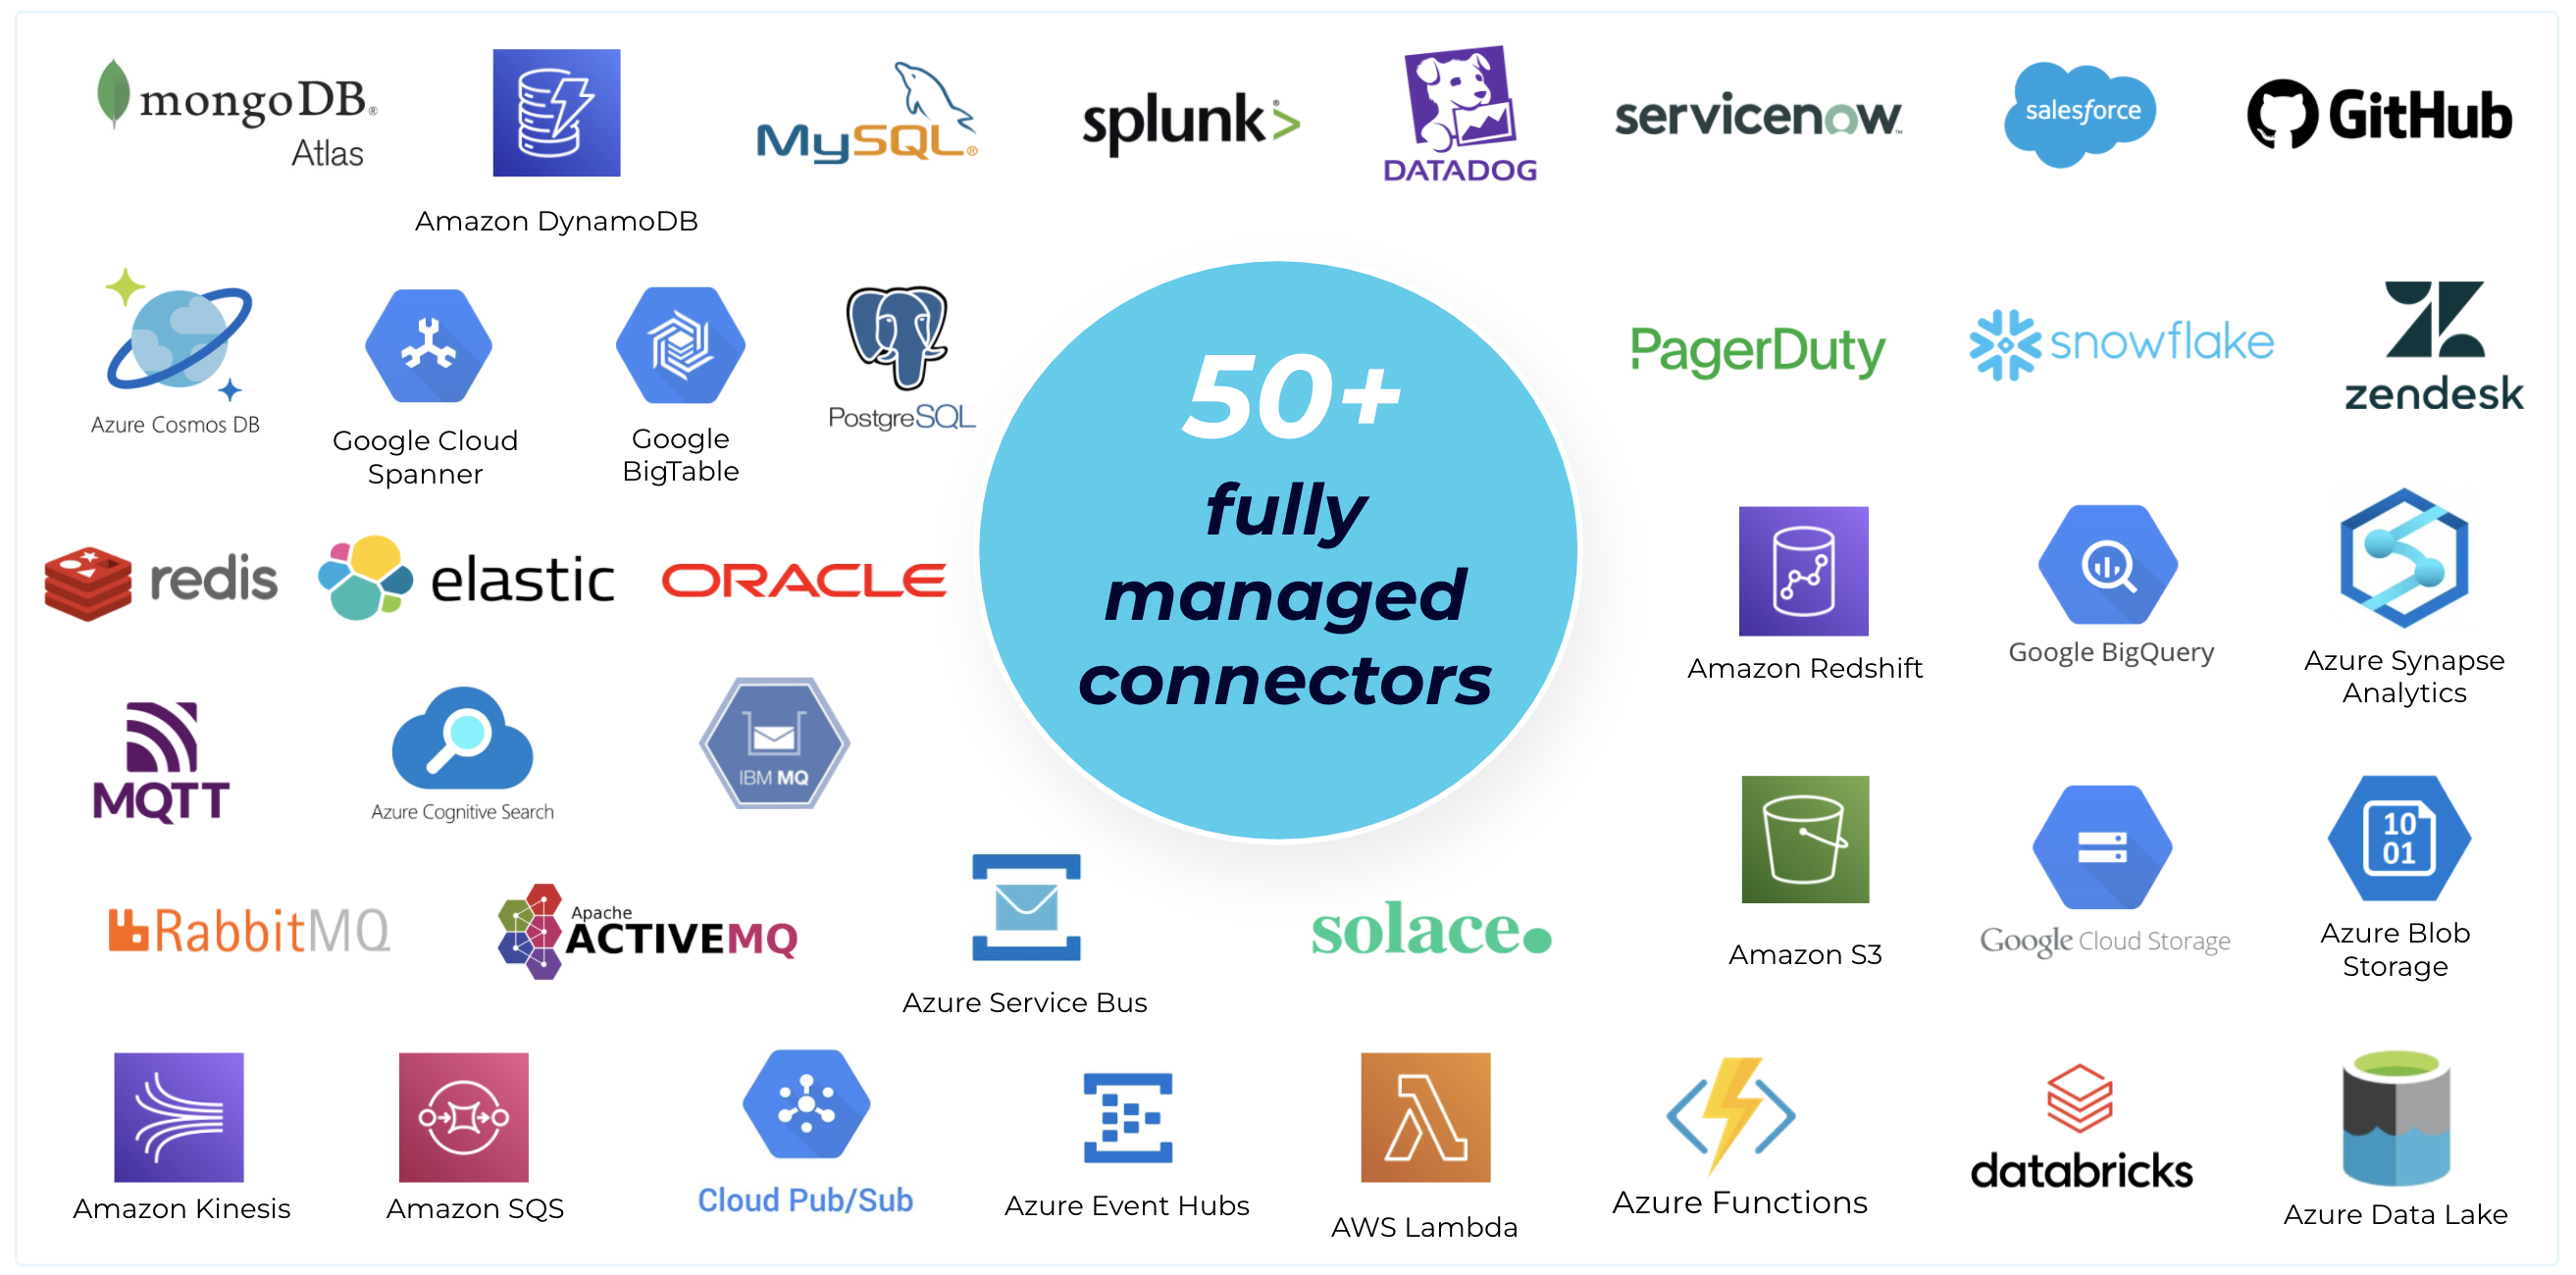 50+ fully managed connectors